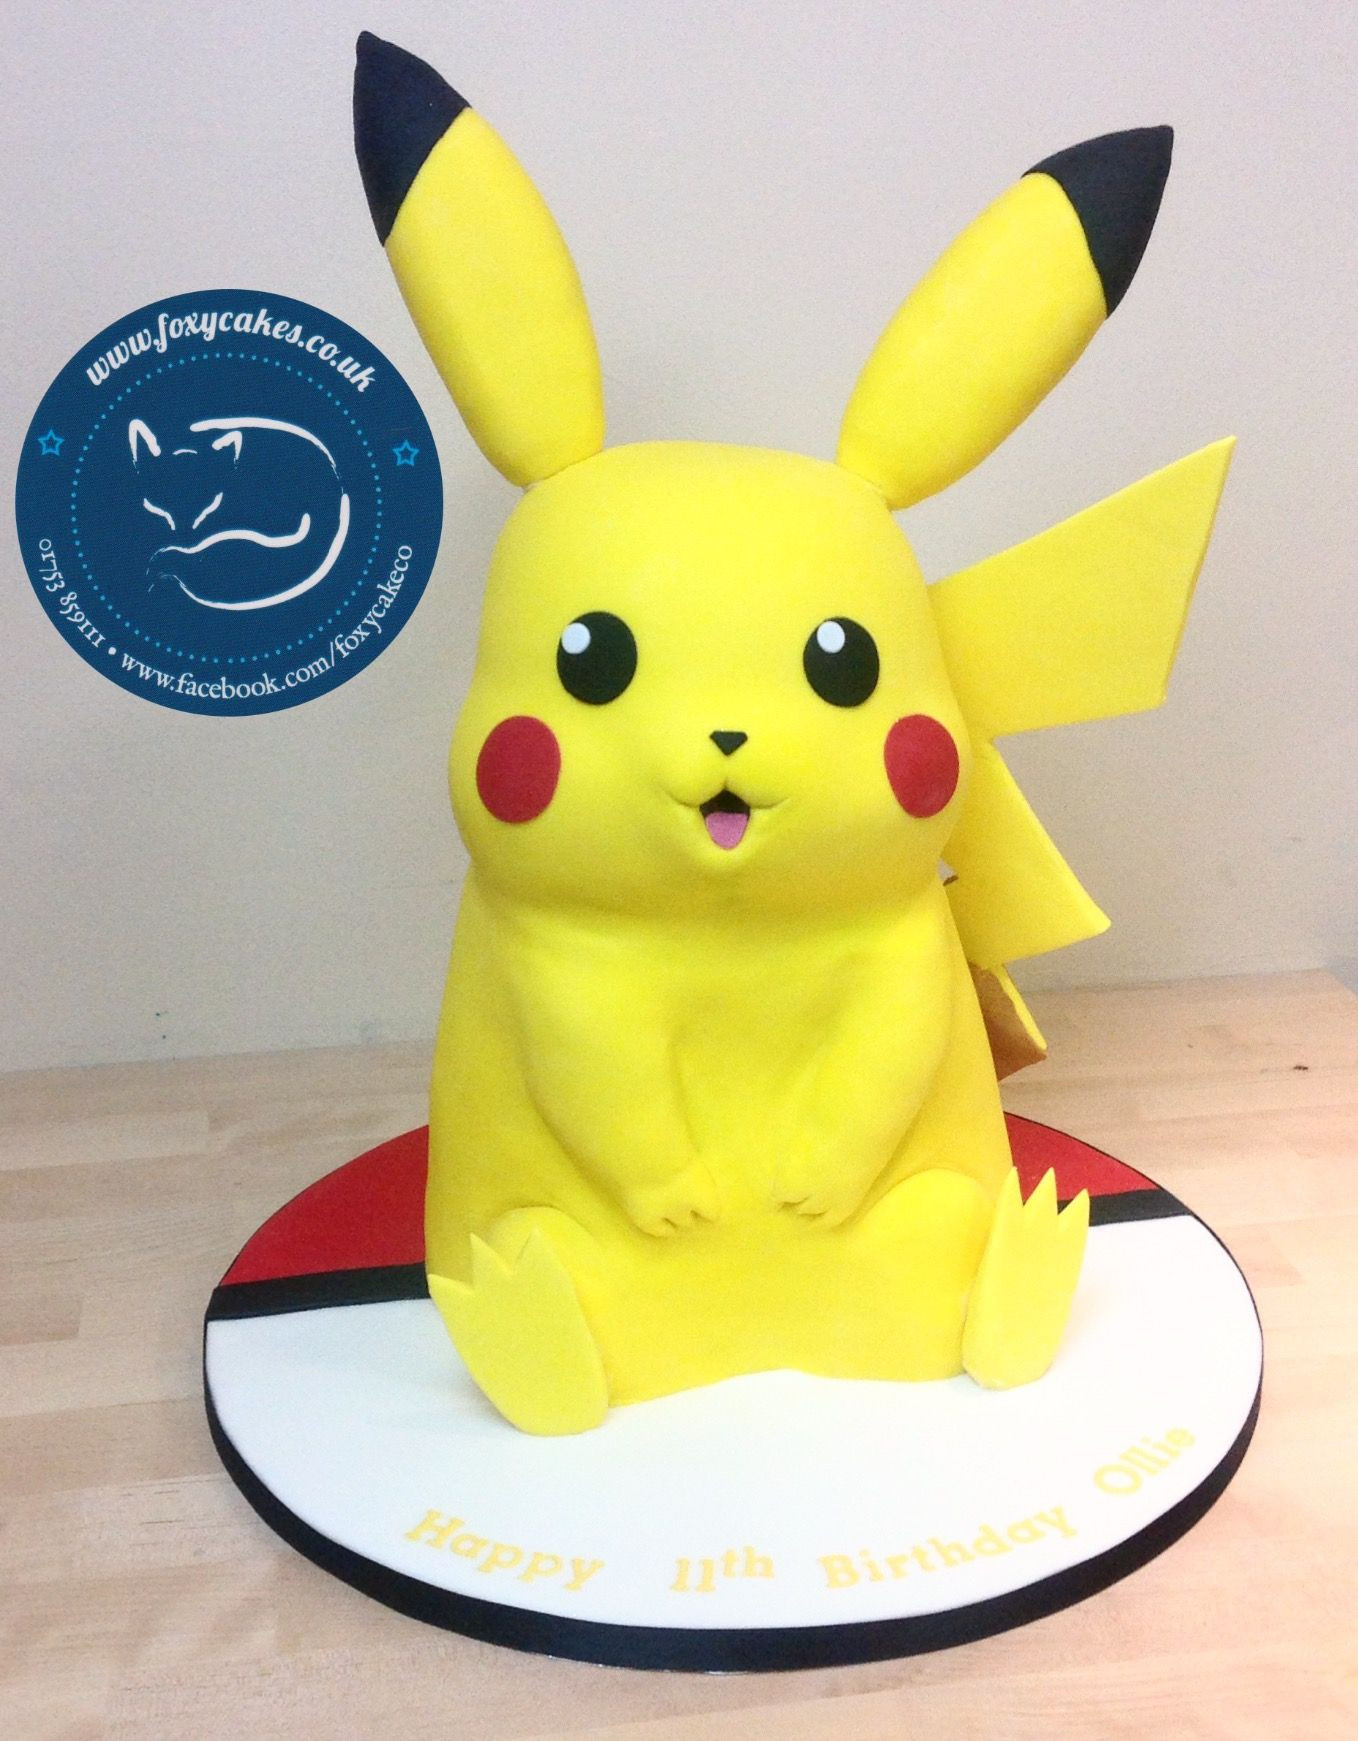 Pikachu Birthday Cake
 3D Pikachu cake made by The Foxy Cake Co in 2019